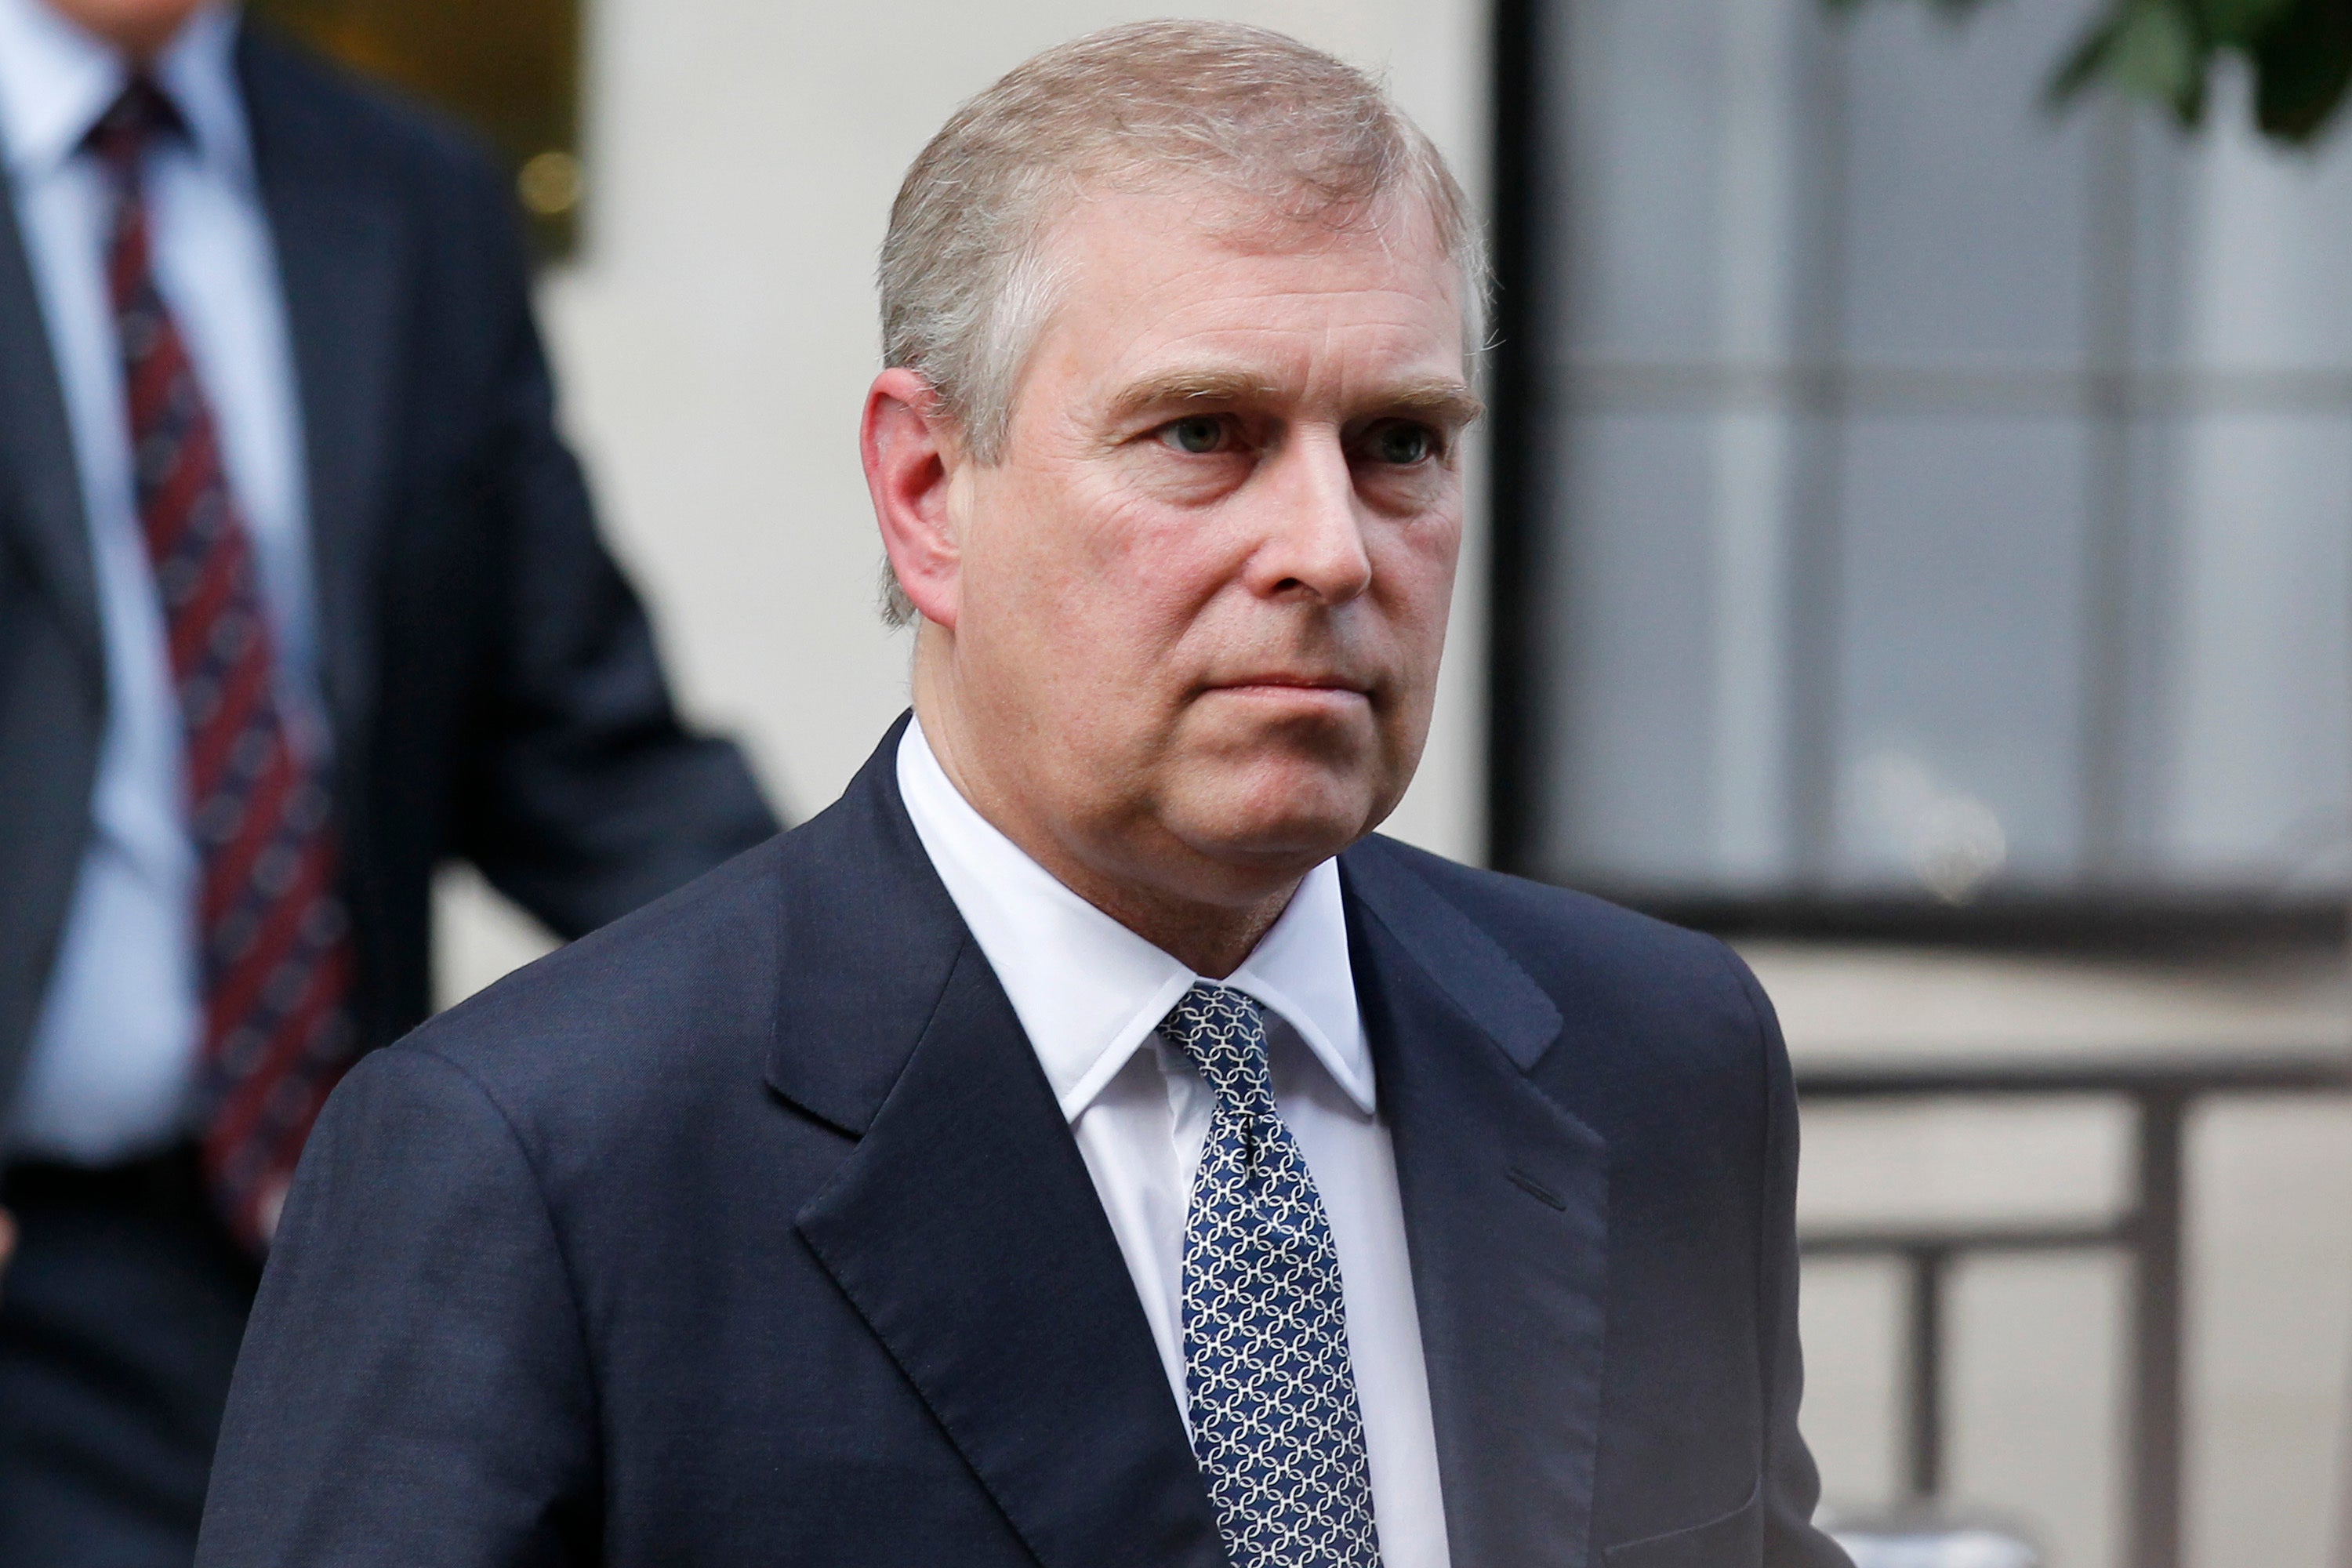 Prince Andrew withdrew from public duties a year ago